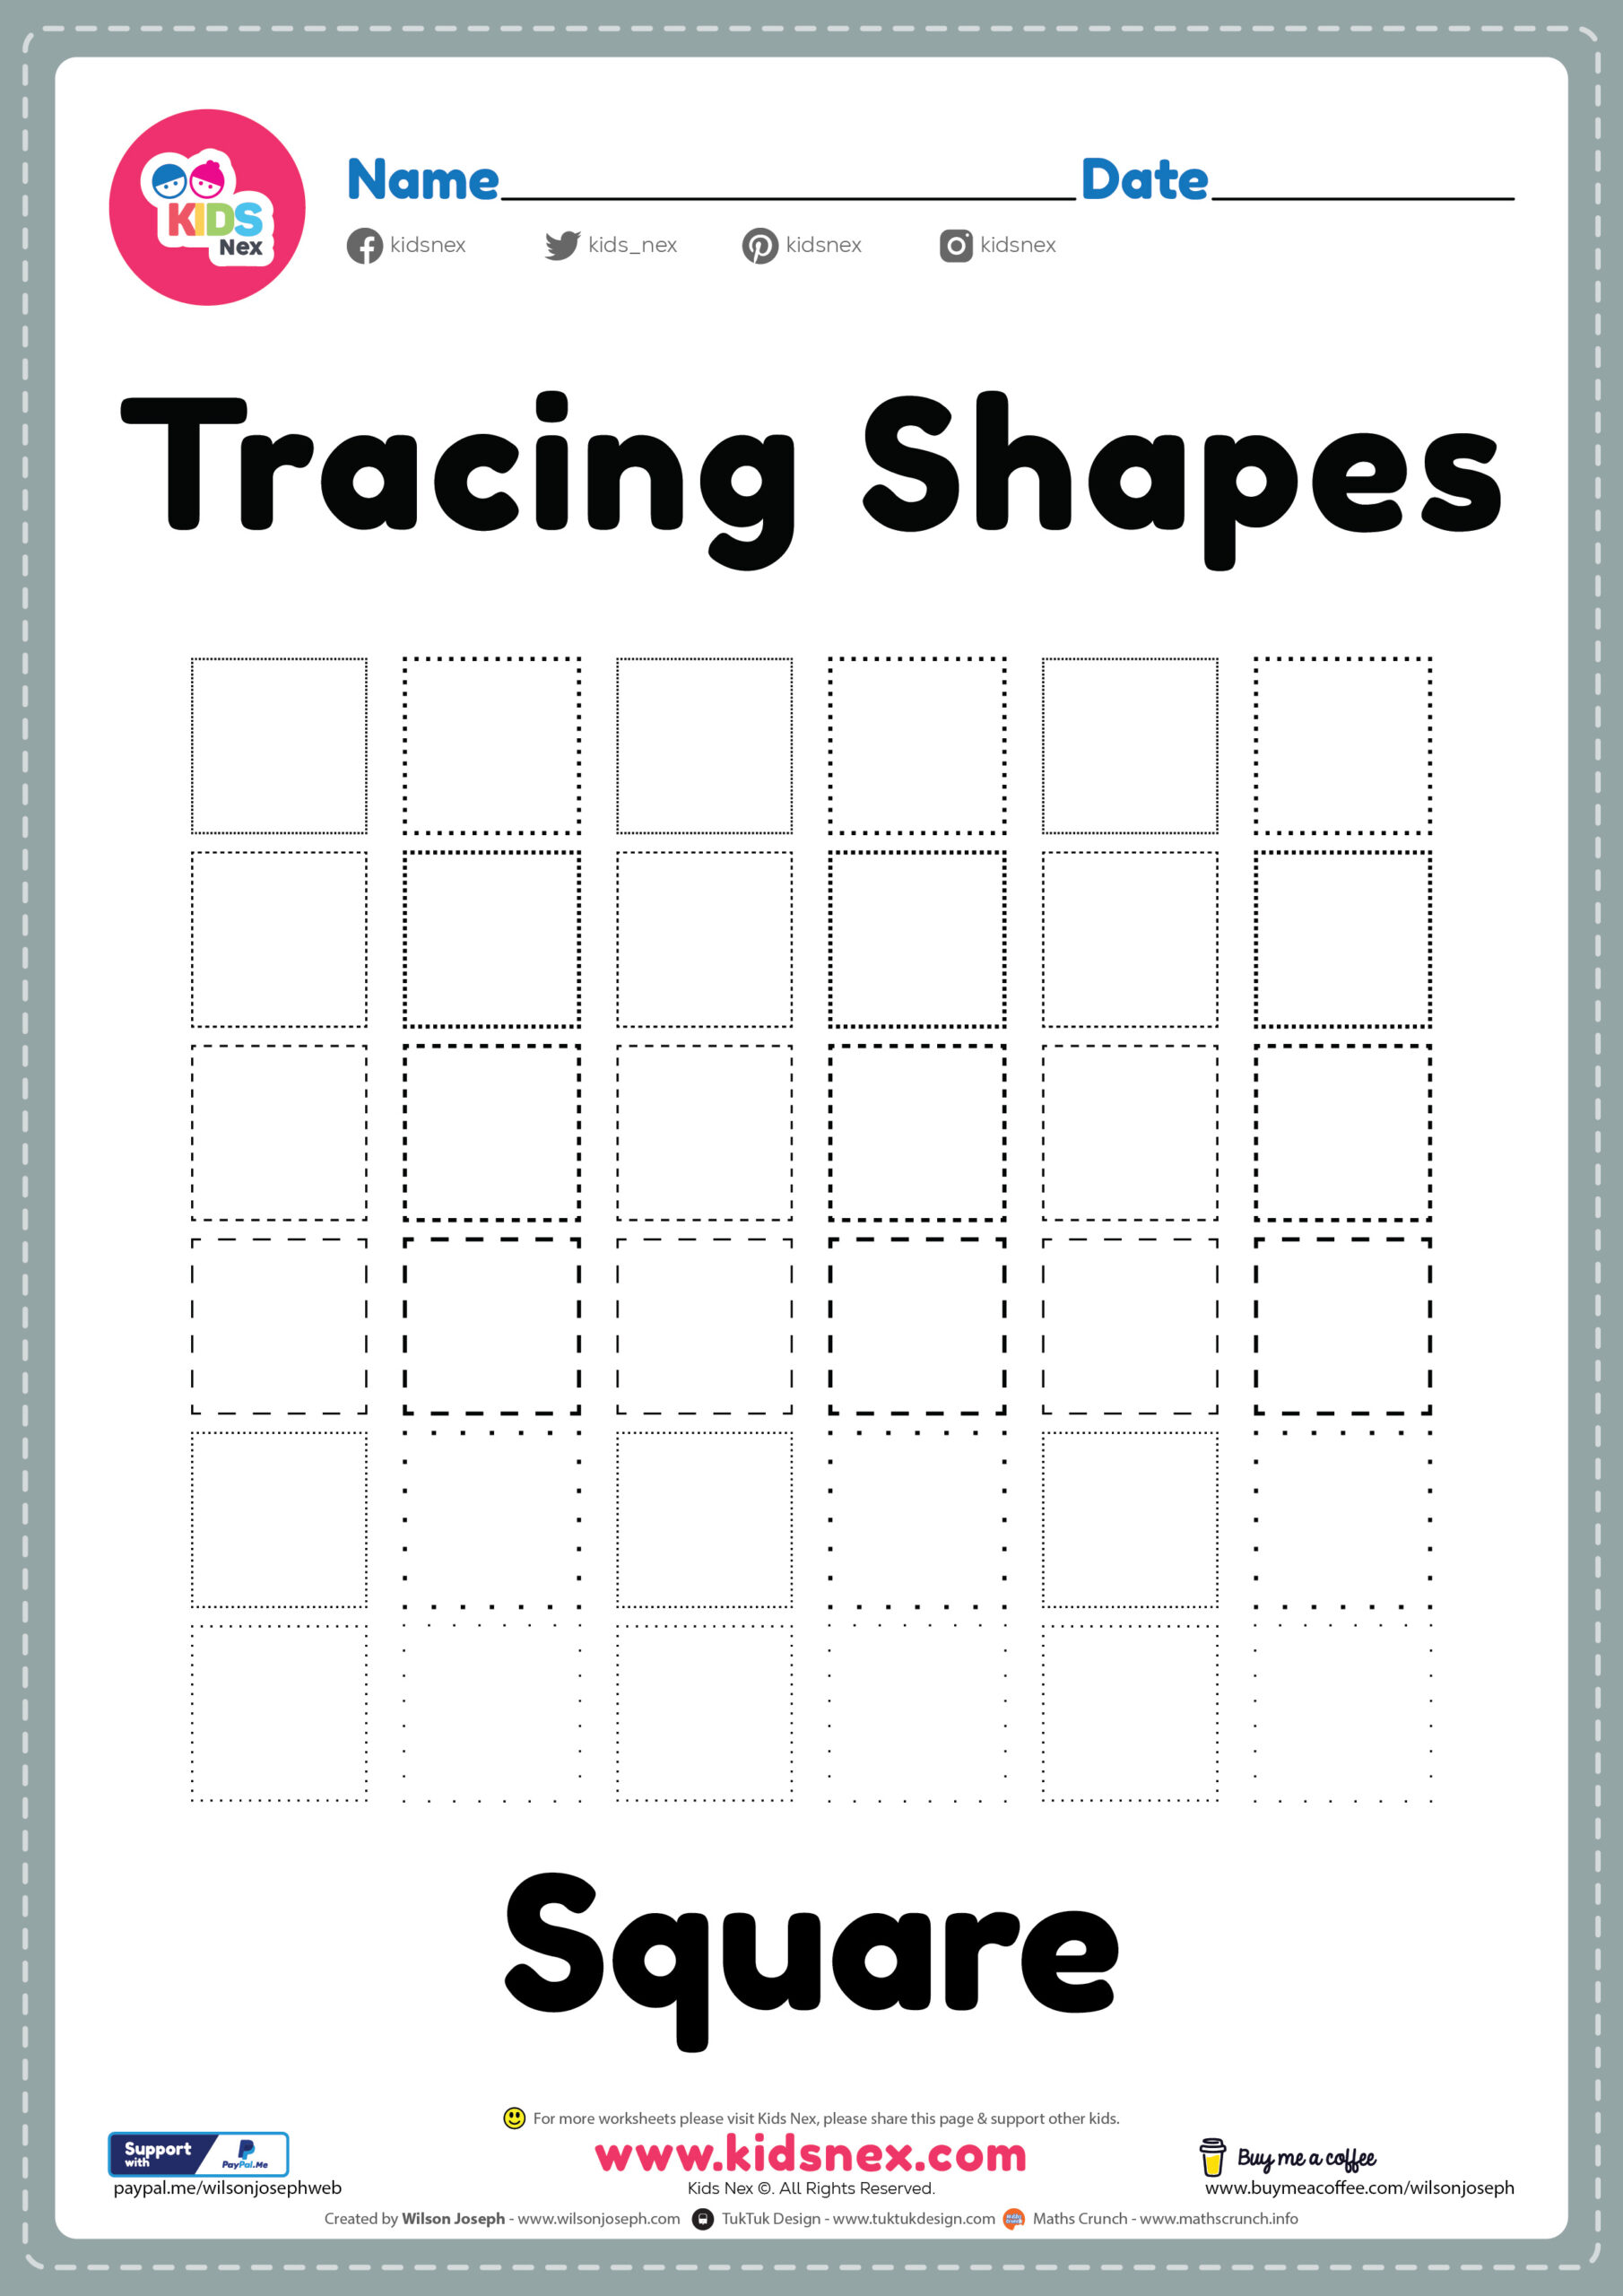 square-worksheet-for-tracing-shapes-free-printable-for-kids